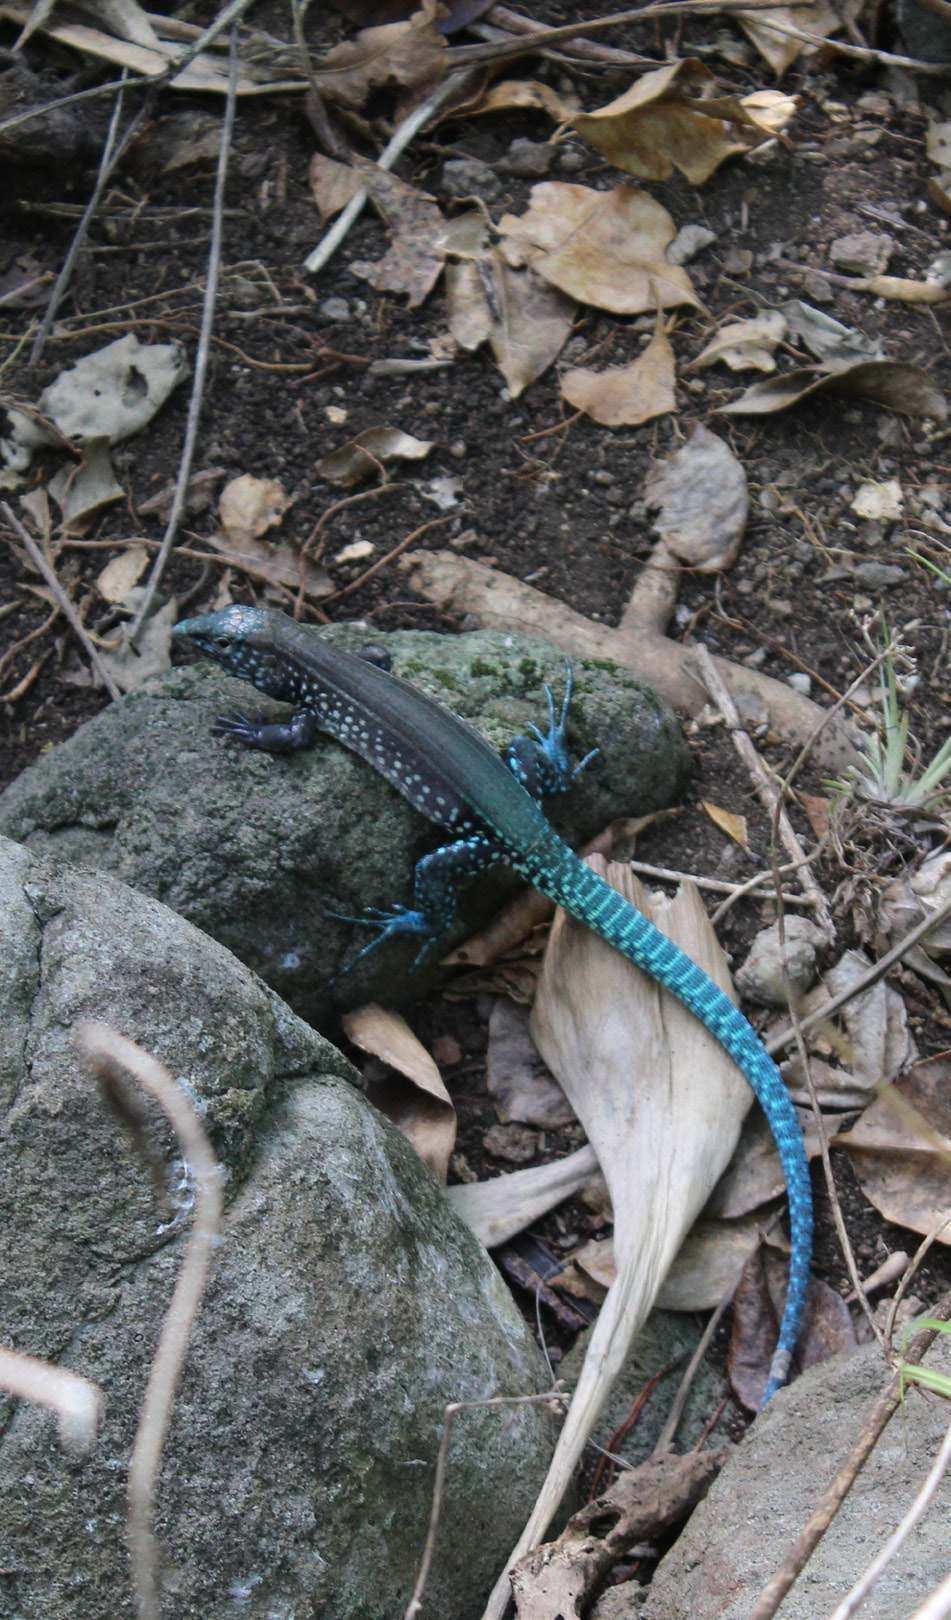 The whiptail lizard.